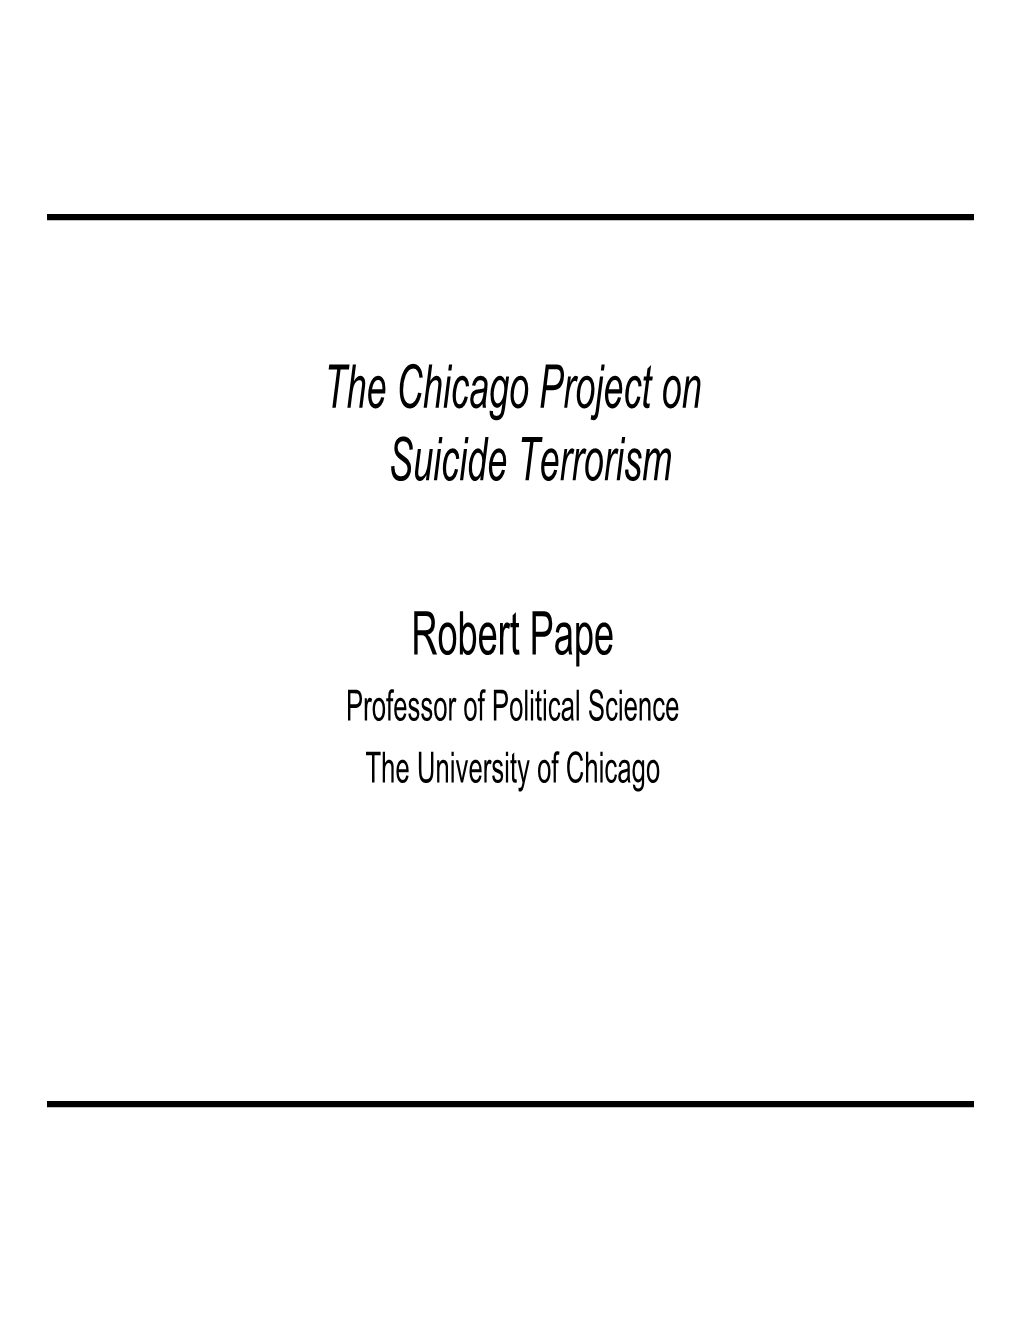 The Chicago Project on Suicide Terrorism Robert Pape